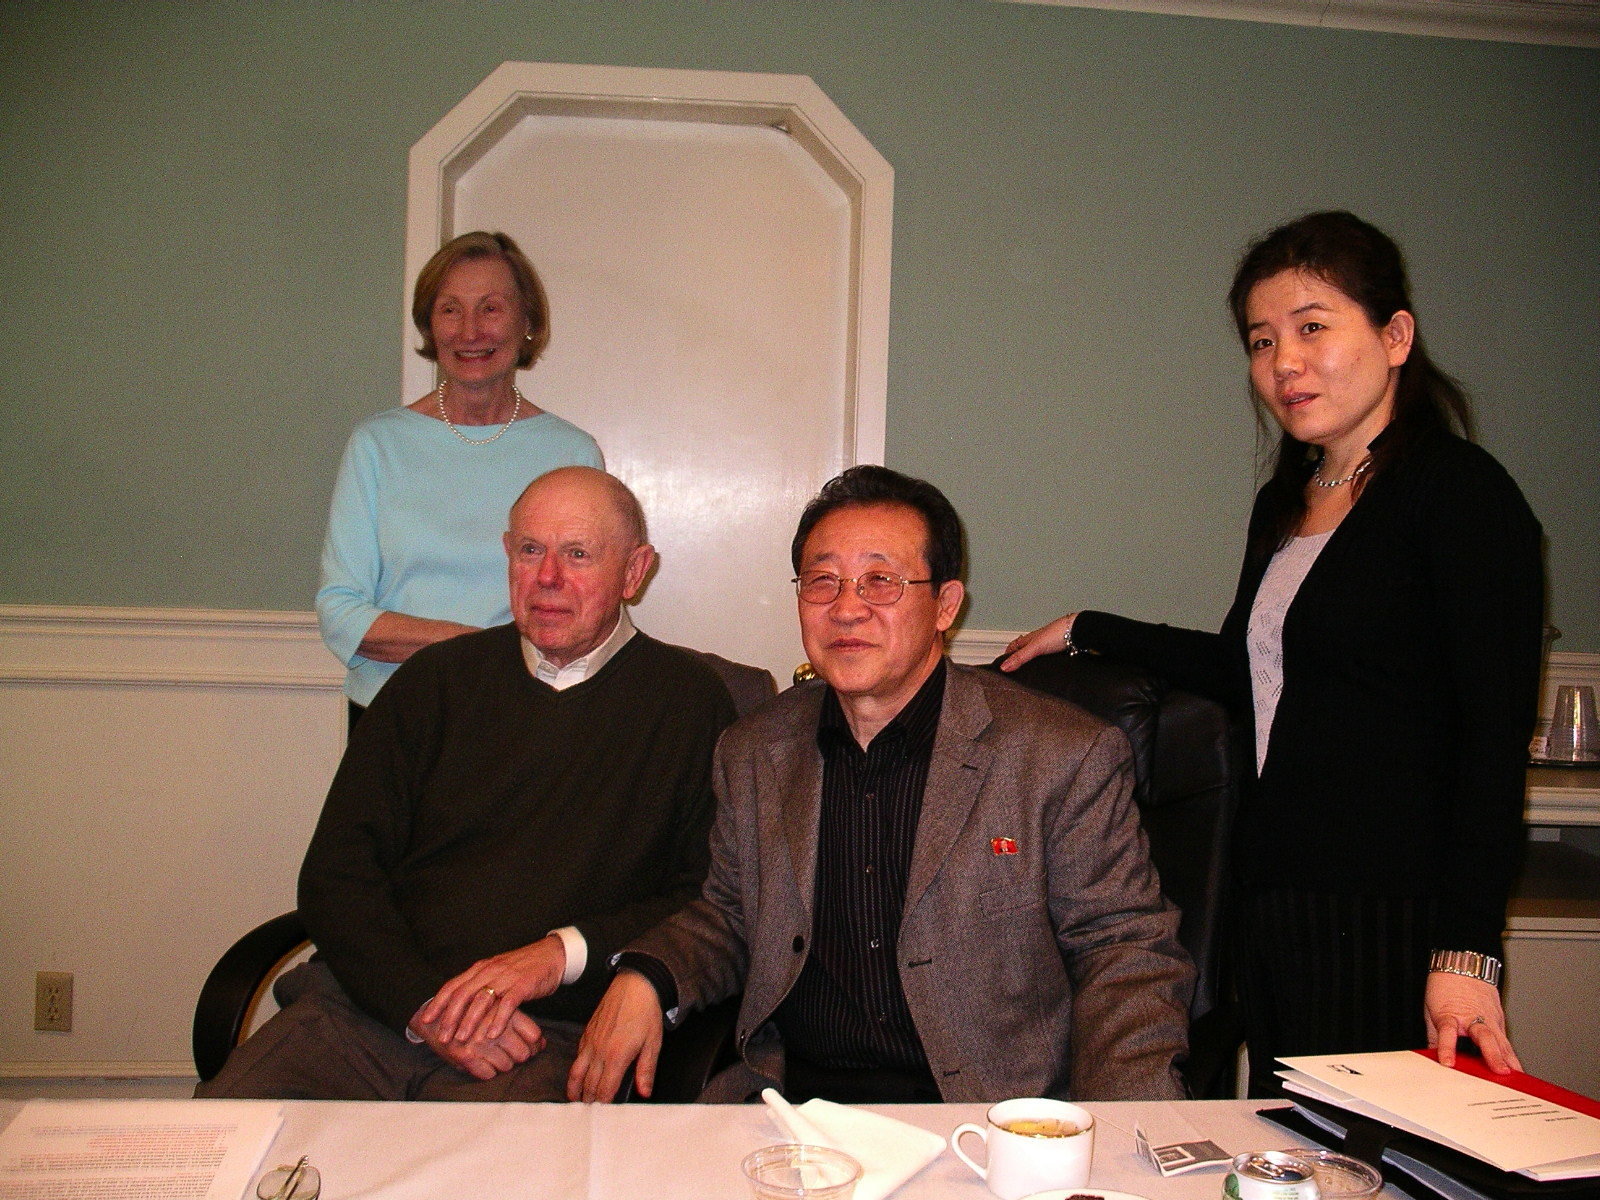 Two men sitting and two women standing on each side